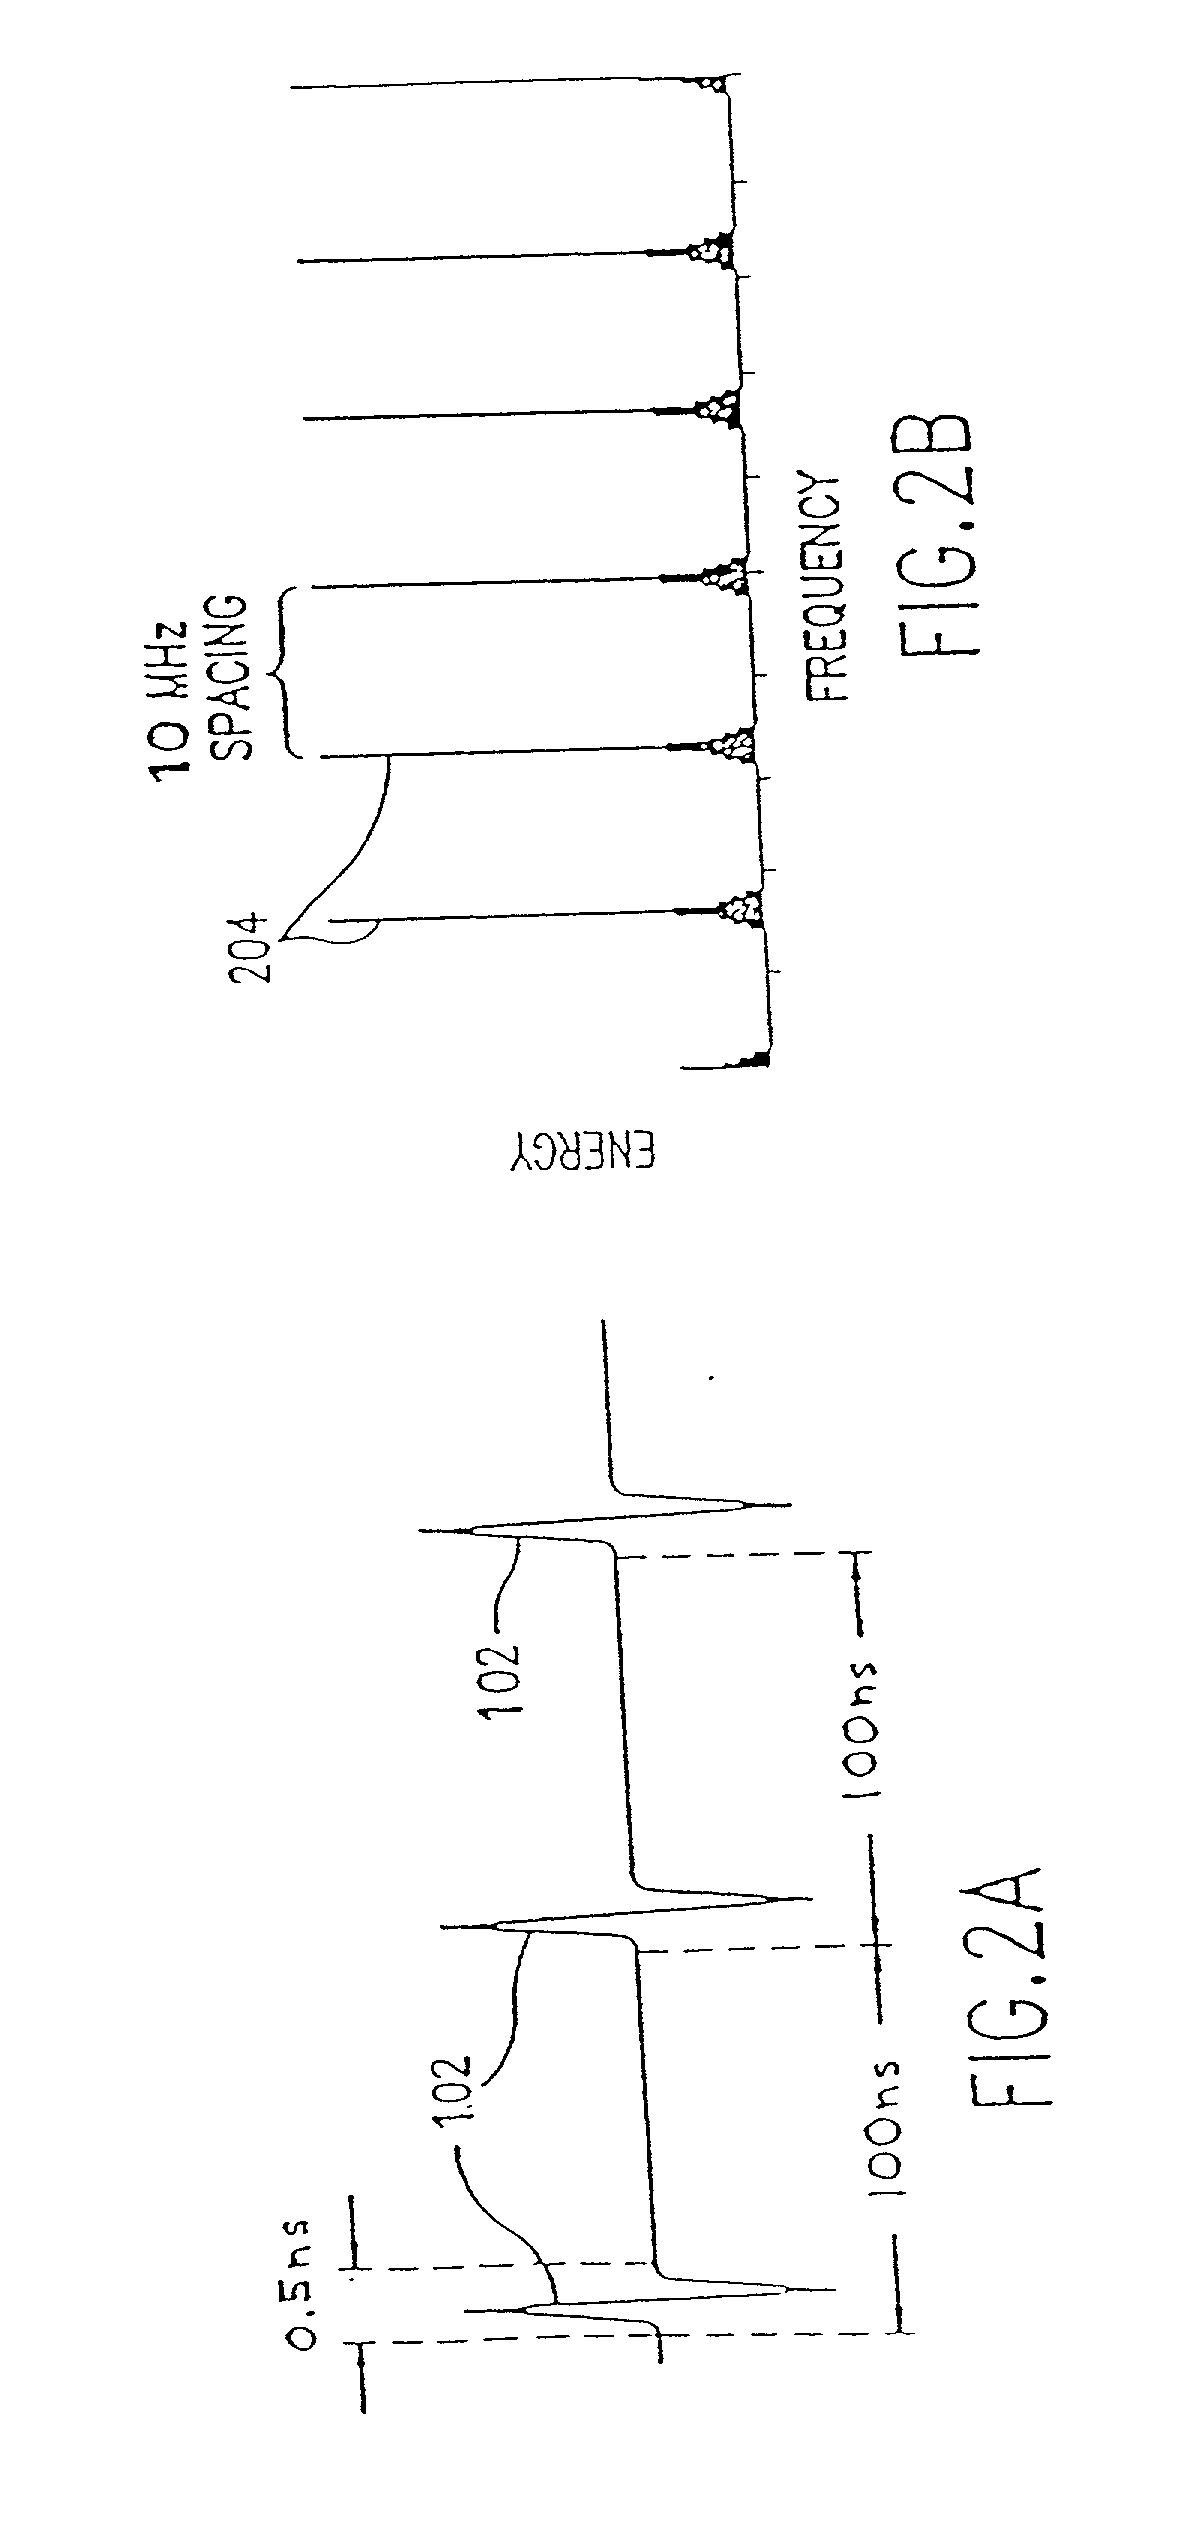 Method and apparatus for enabling communication and synchronization between an information processing device and a personal digital assistant using impulse radio wireless techniques